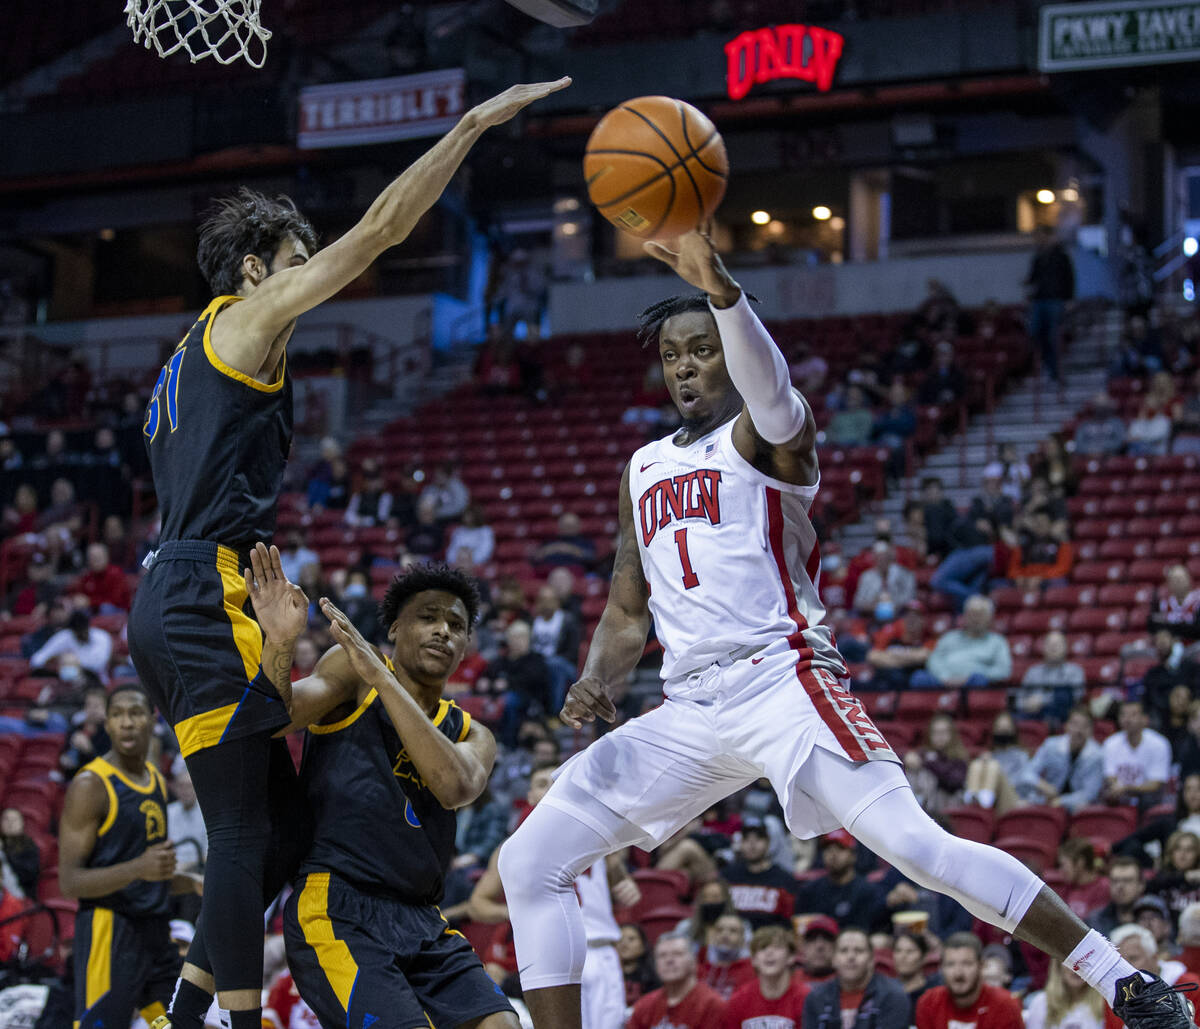 San Jose State Spartans forward Tibet Gorener (31) attempts to block a late pass by UNLV Rebels ...